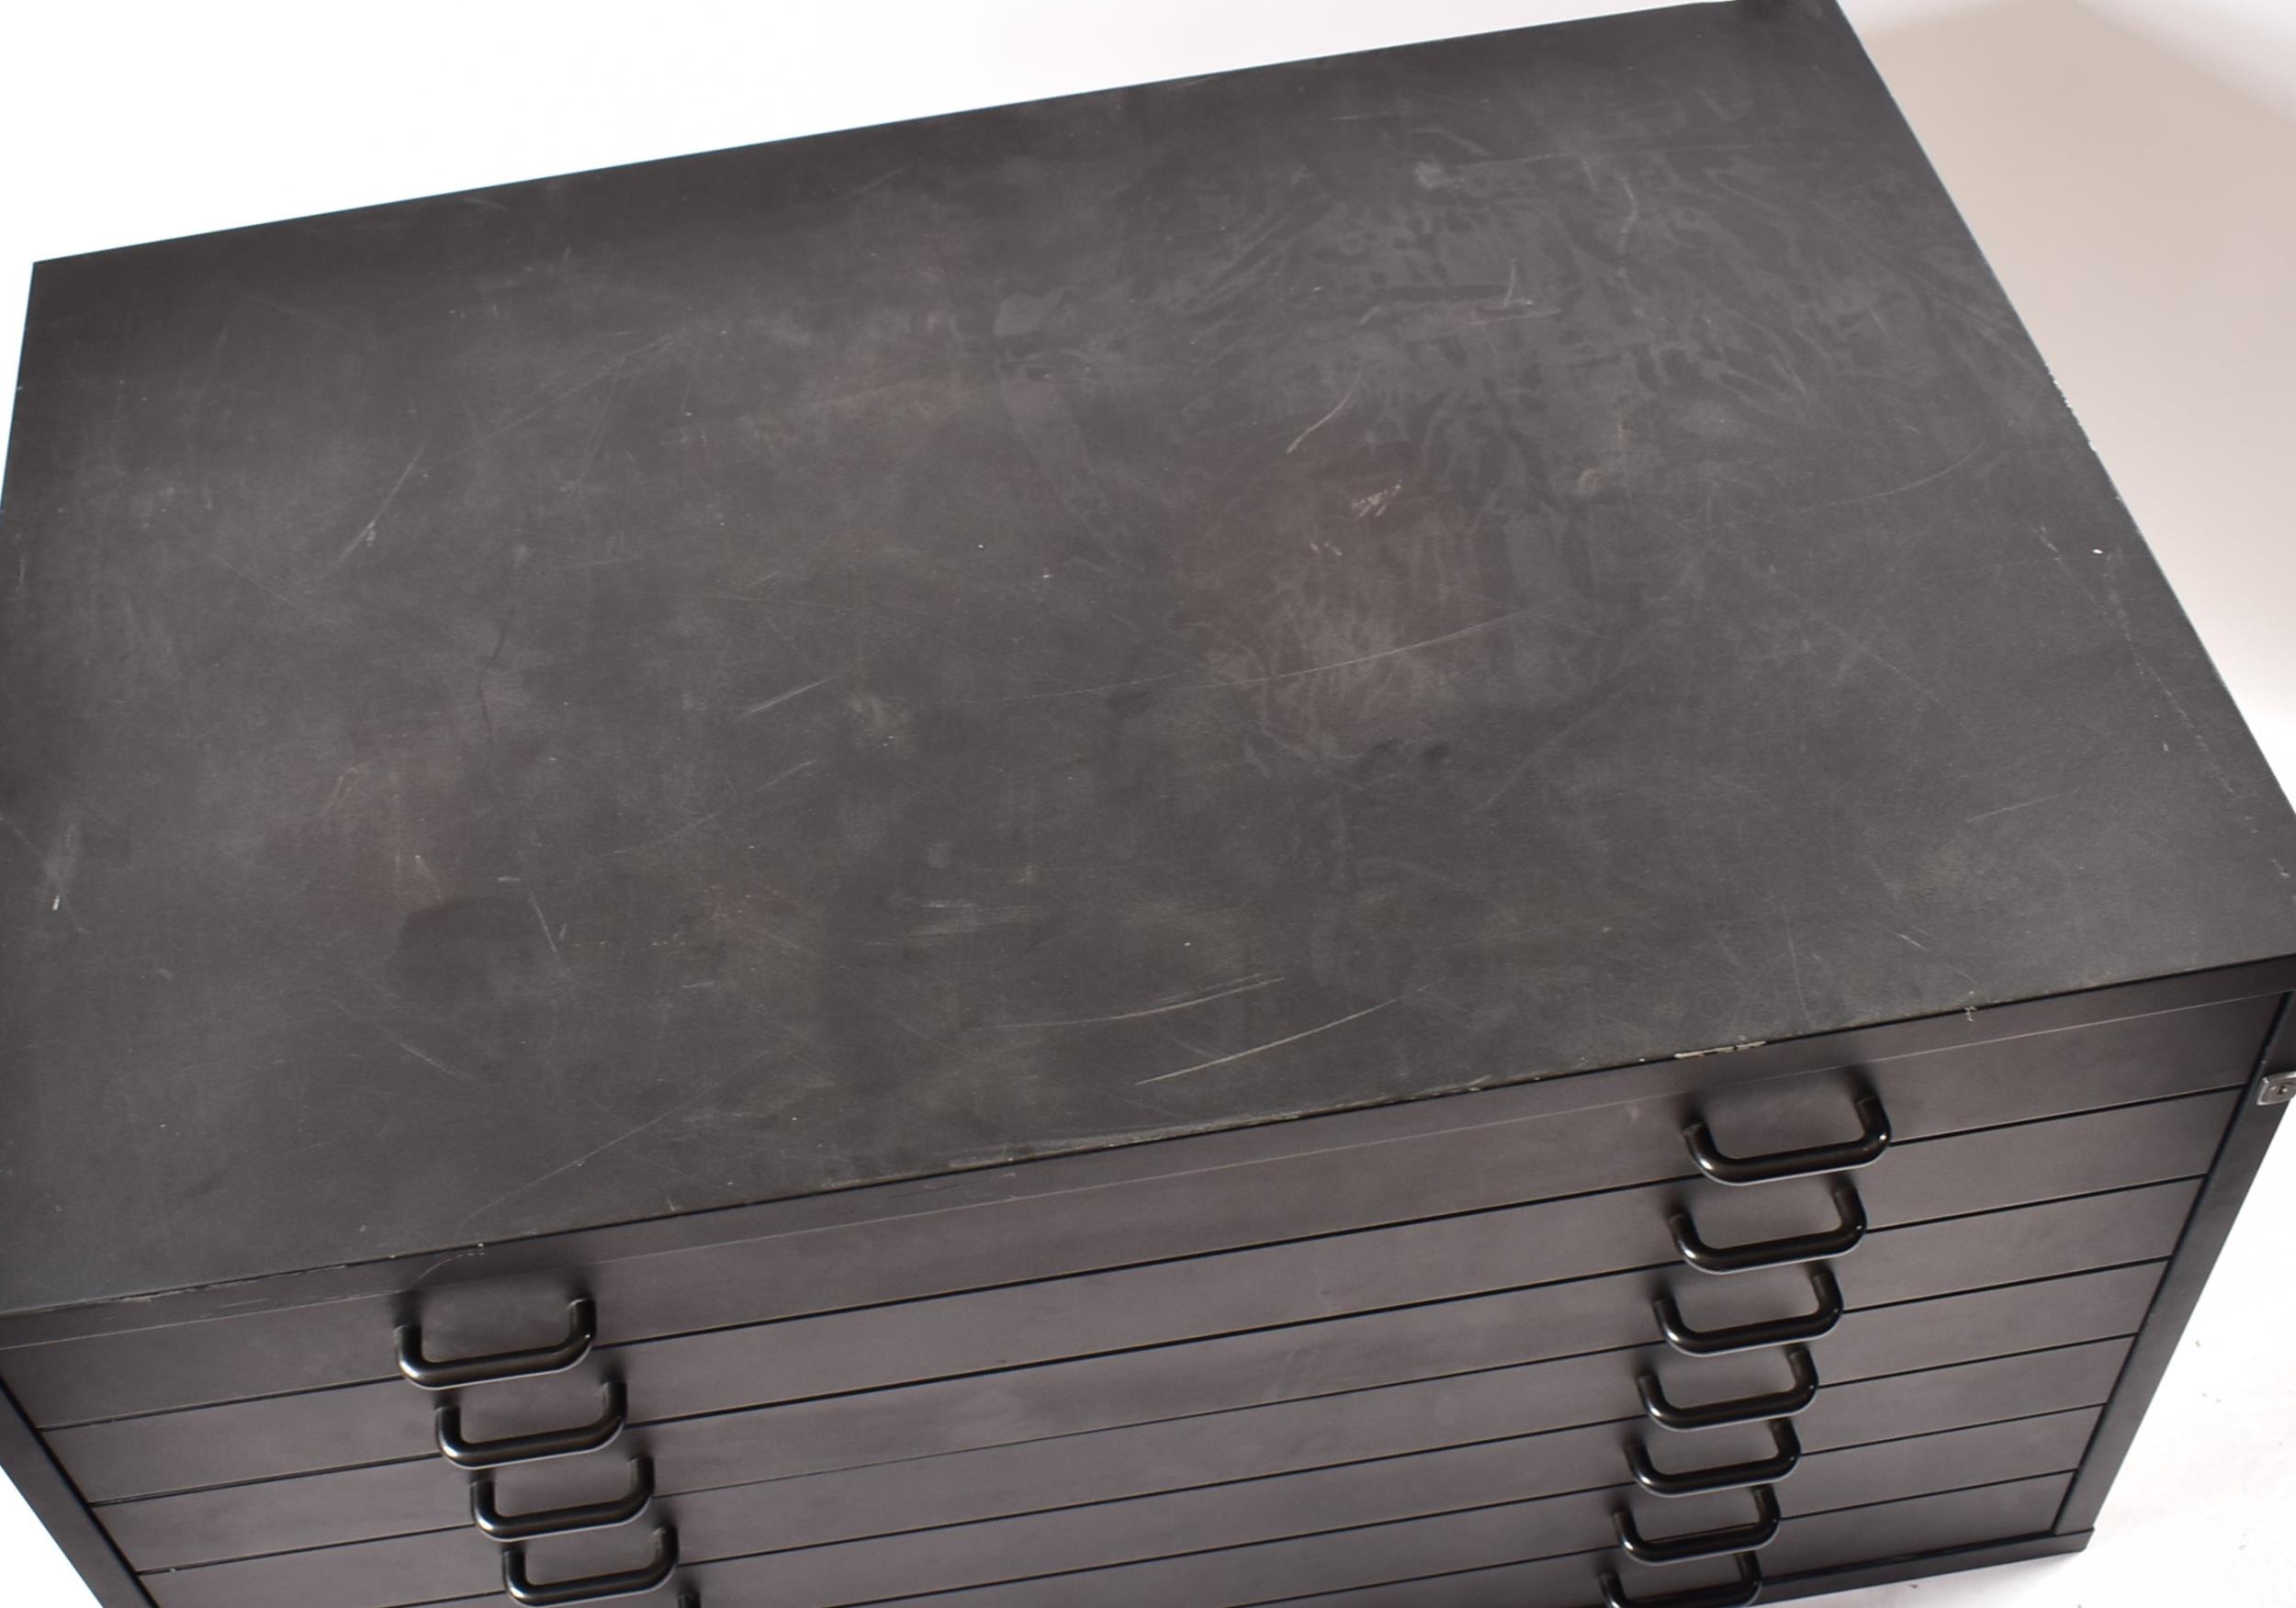 LARGE CONTEMPORARY BLACK PAINTED METAL FILING CABINET CHEST - Image 2 of 8